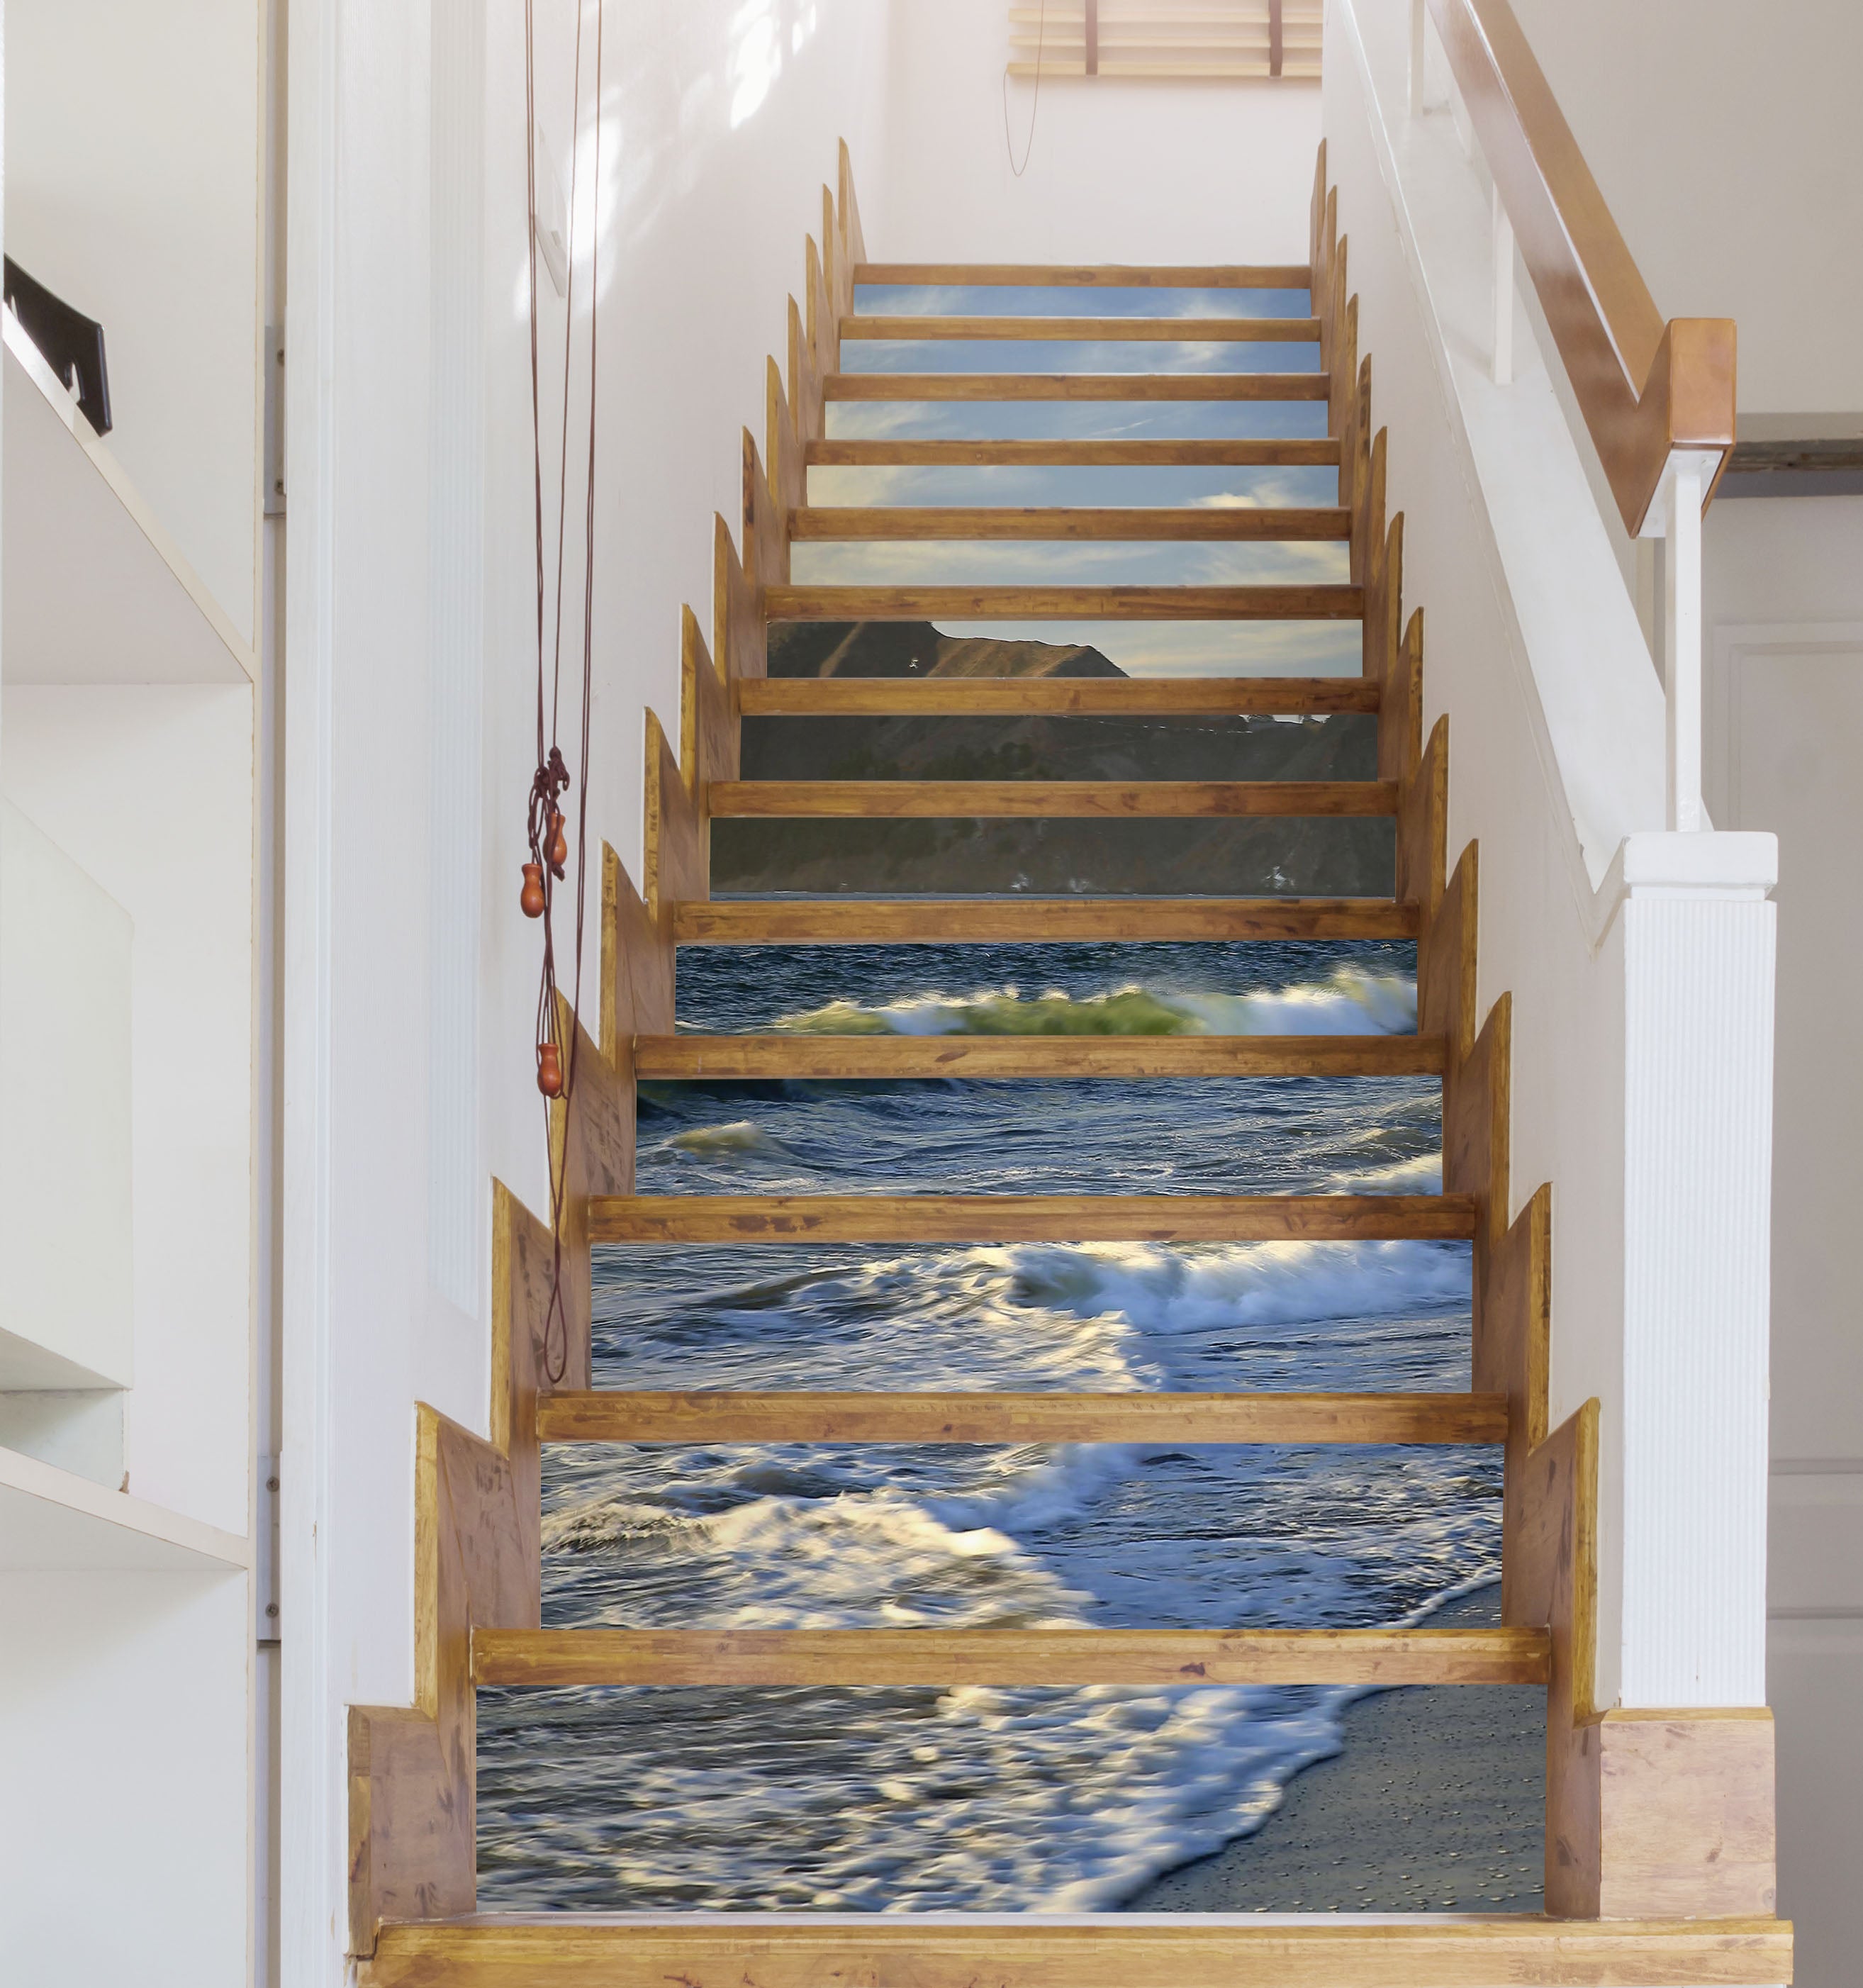 3D Waves 98212 Kathy Barefield Stair Risers